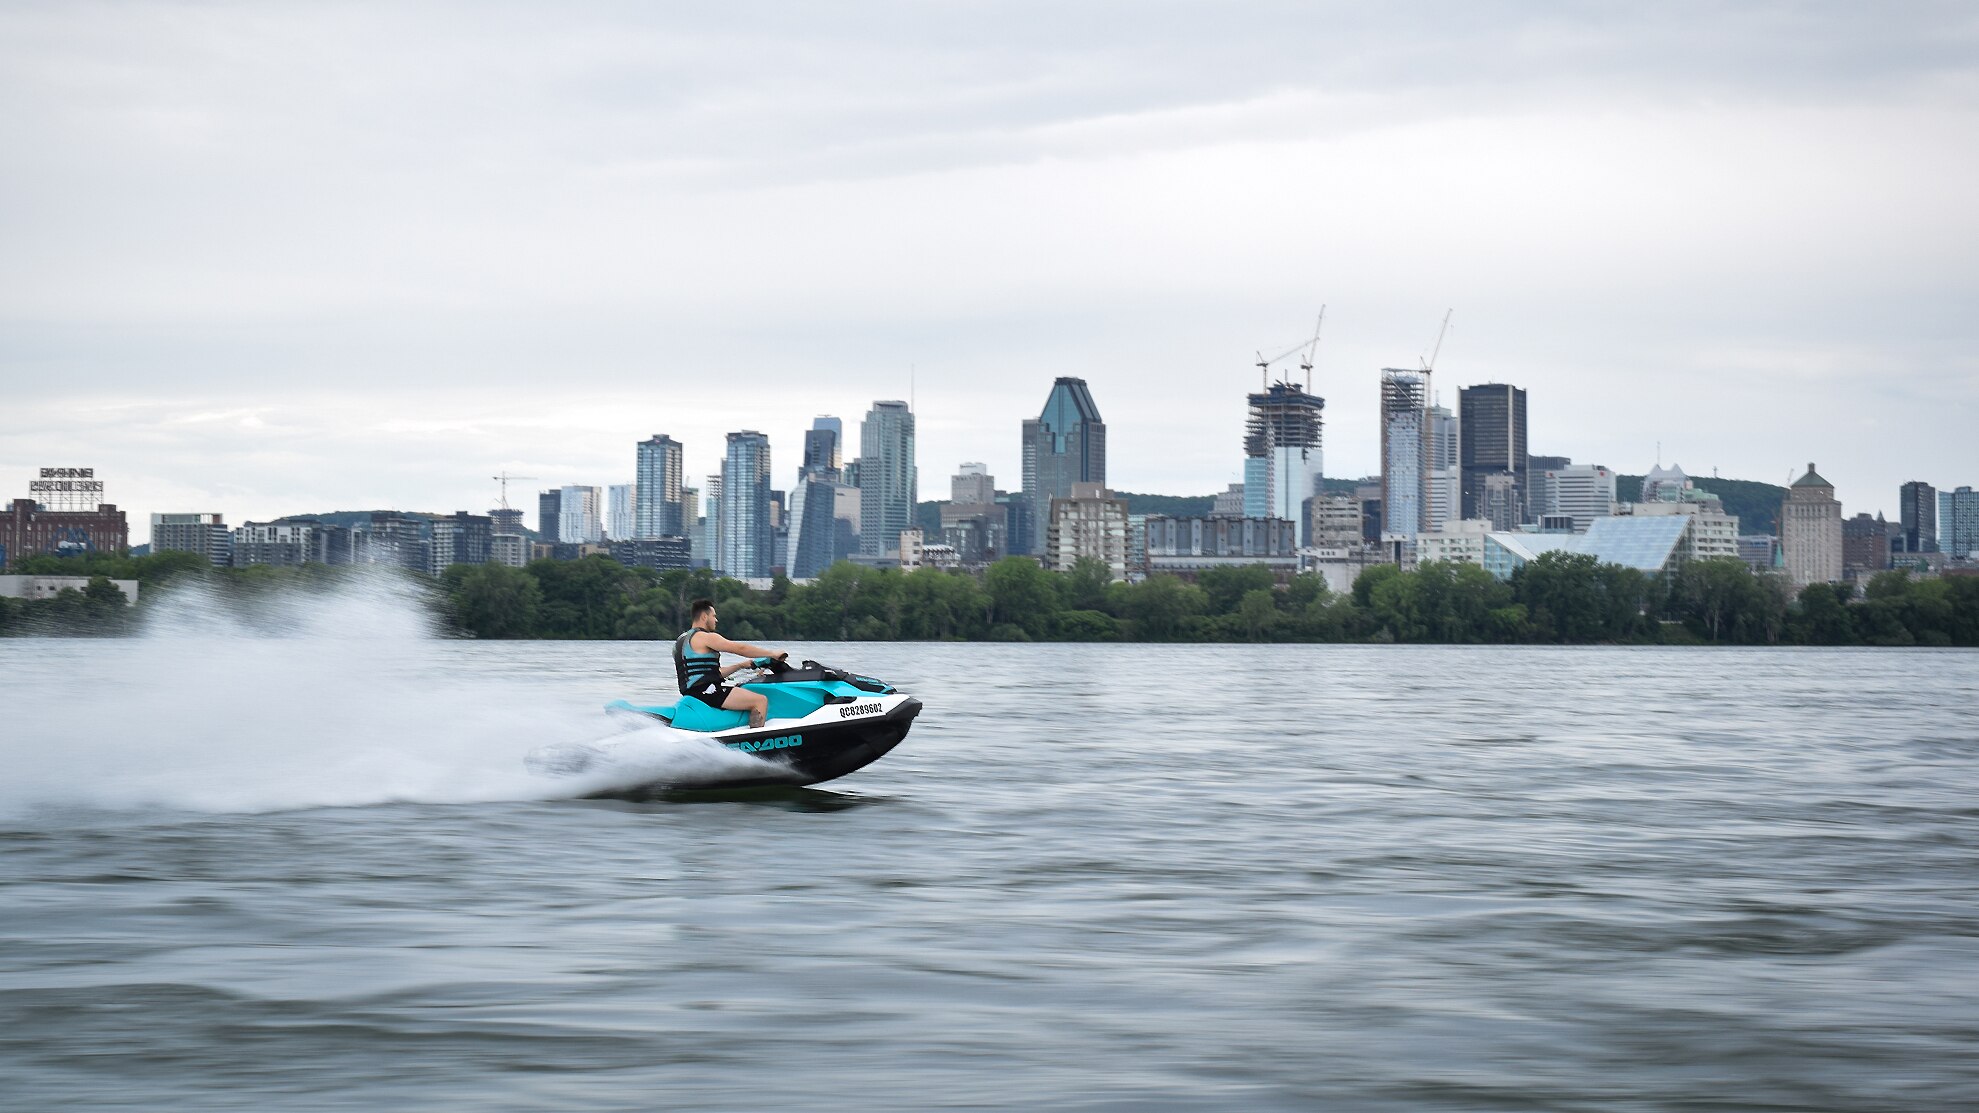 A man driving a Sea-Doo pwc with skyscrapers in the background